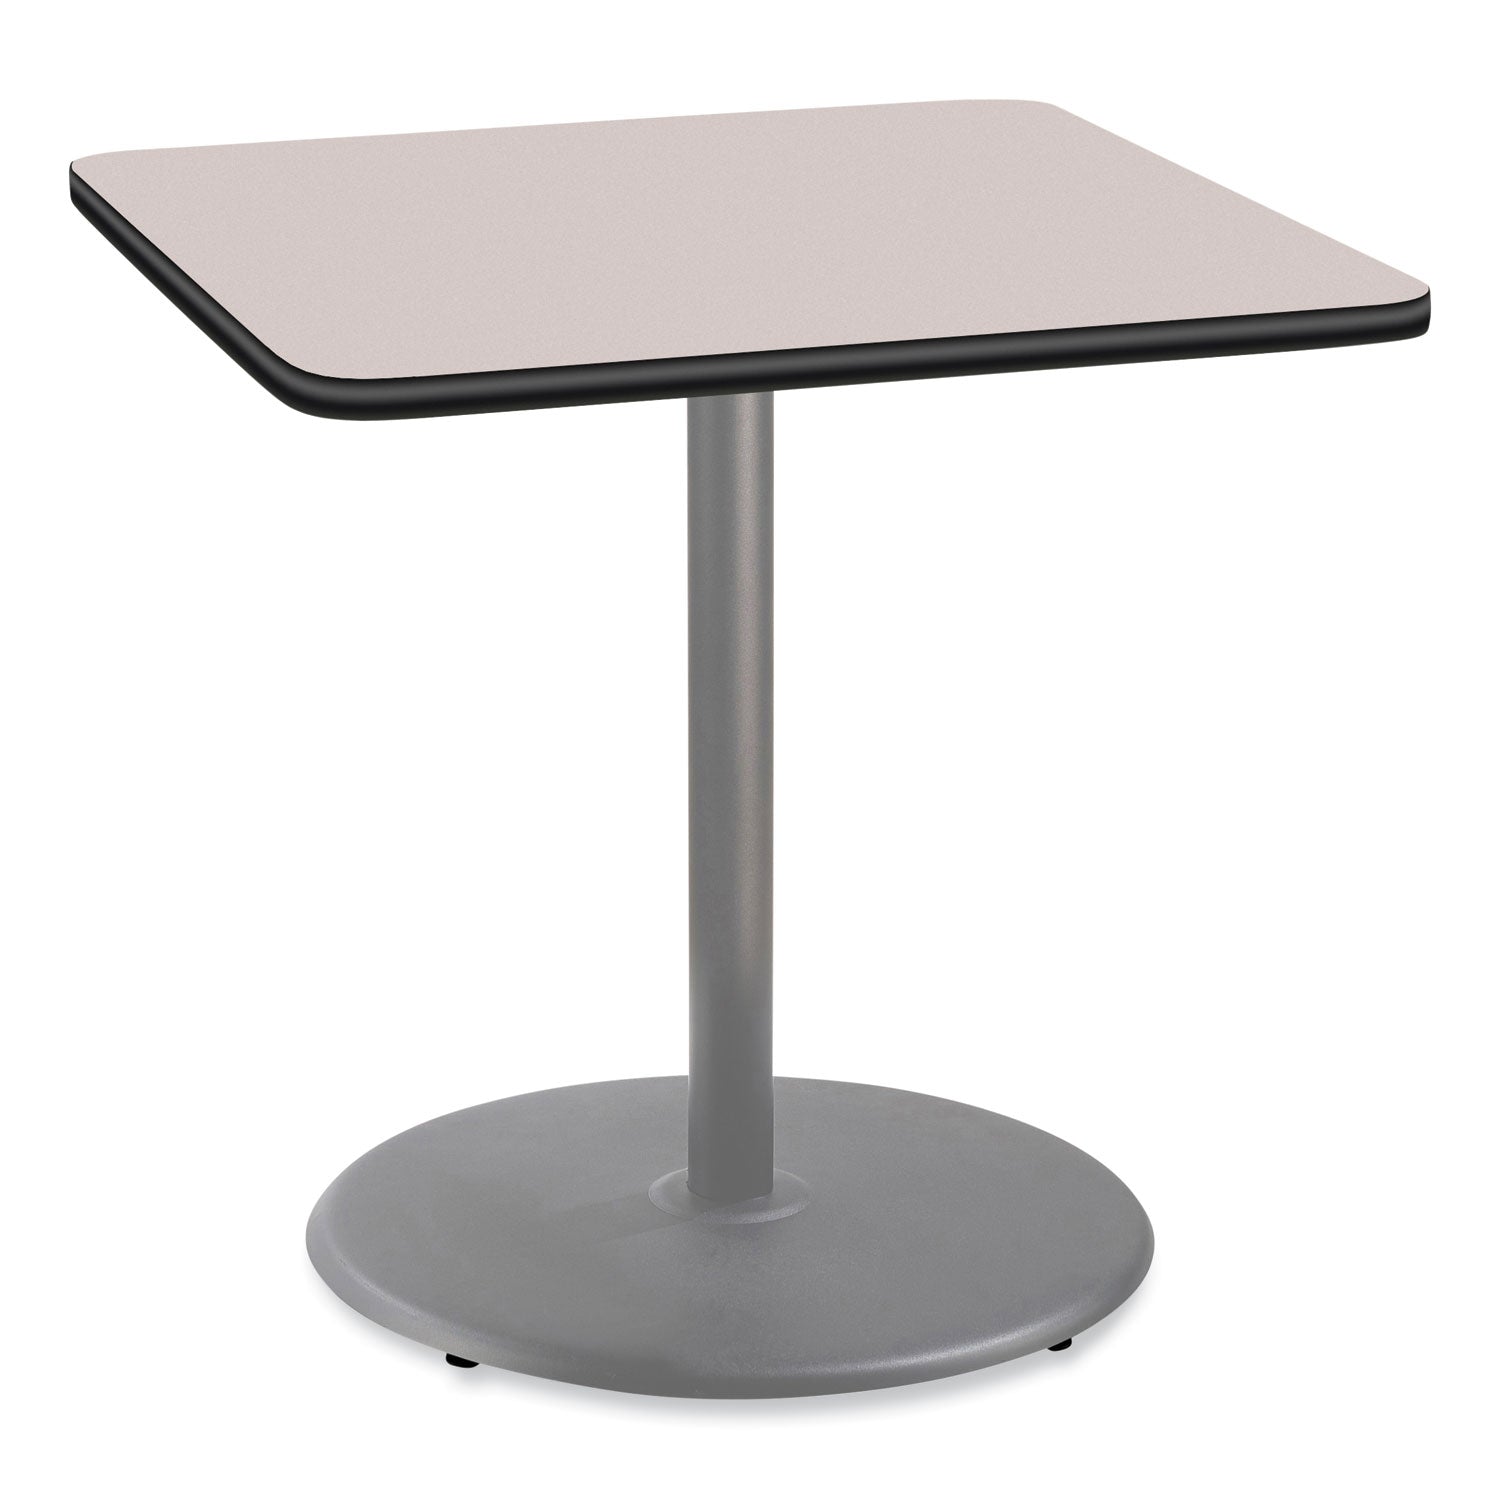 cafe-table-36w-x-36d-x-36h-square-top-round-base-gray-nebula-top-gray-base-ships-in-7-10-business-days_npscg33636rc1gy - 1